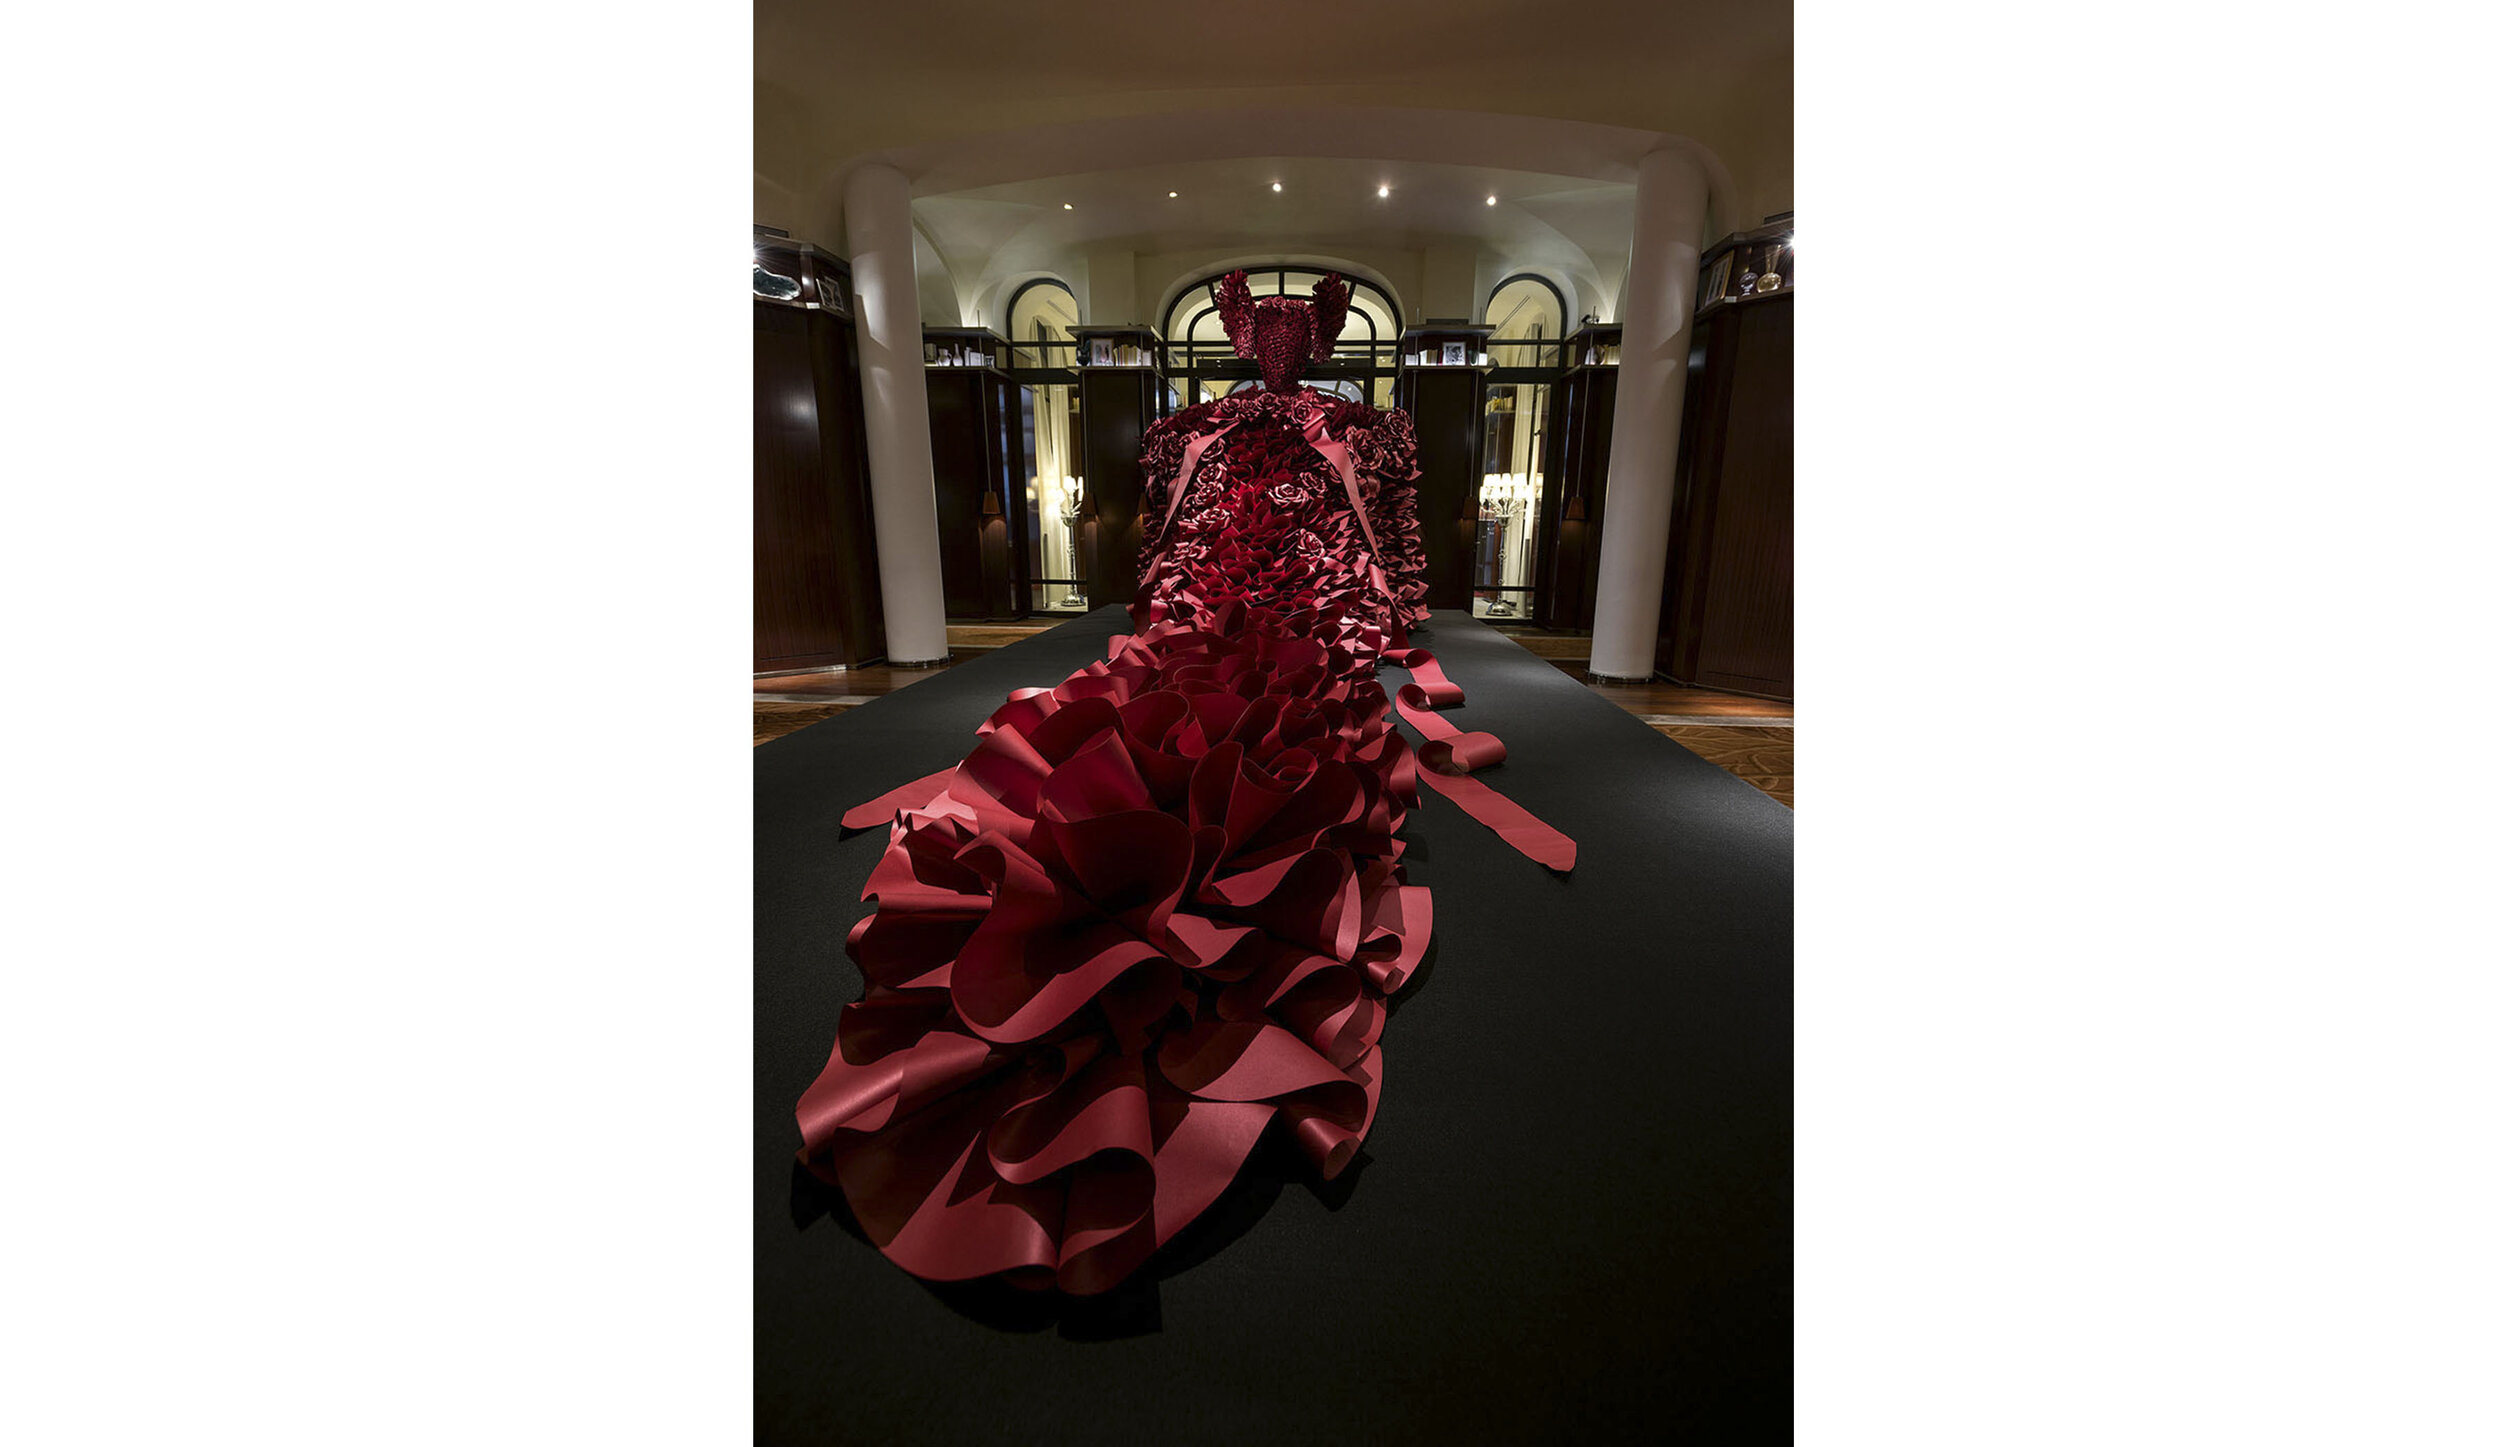 le-royal-monceau-zoebradley-couture-paperdress-red-roses-paperflowers-art-fashion-design3.jpg